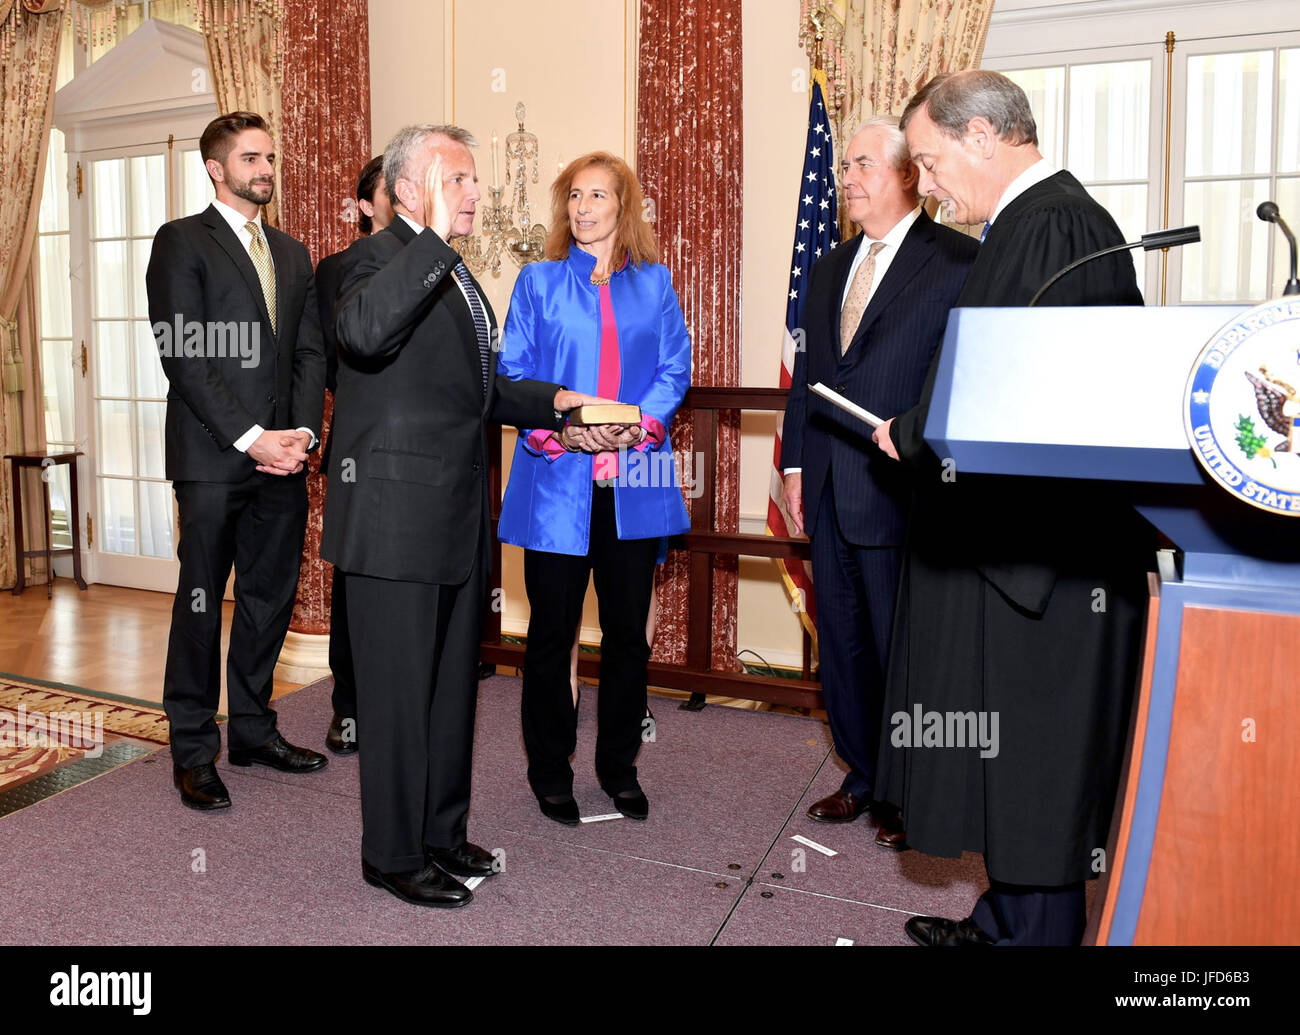 With family and U.S. Secretary of State Rex Tillerson looking on, U.S. Chief Justice John G. Roberts Jr. swears in John Sullivan as the new Deputy Secretary of State at a ceremony at the U.S. Department of State in Washington, D.C., on June 9, 2017. Stock Photo